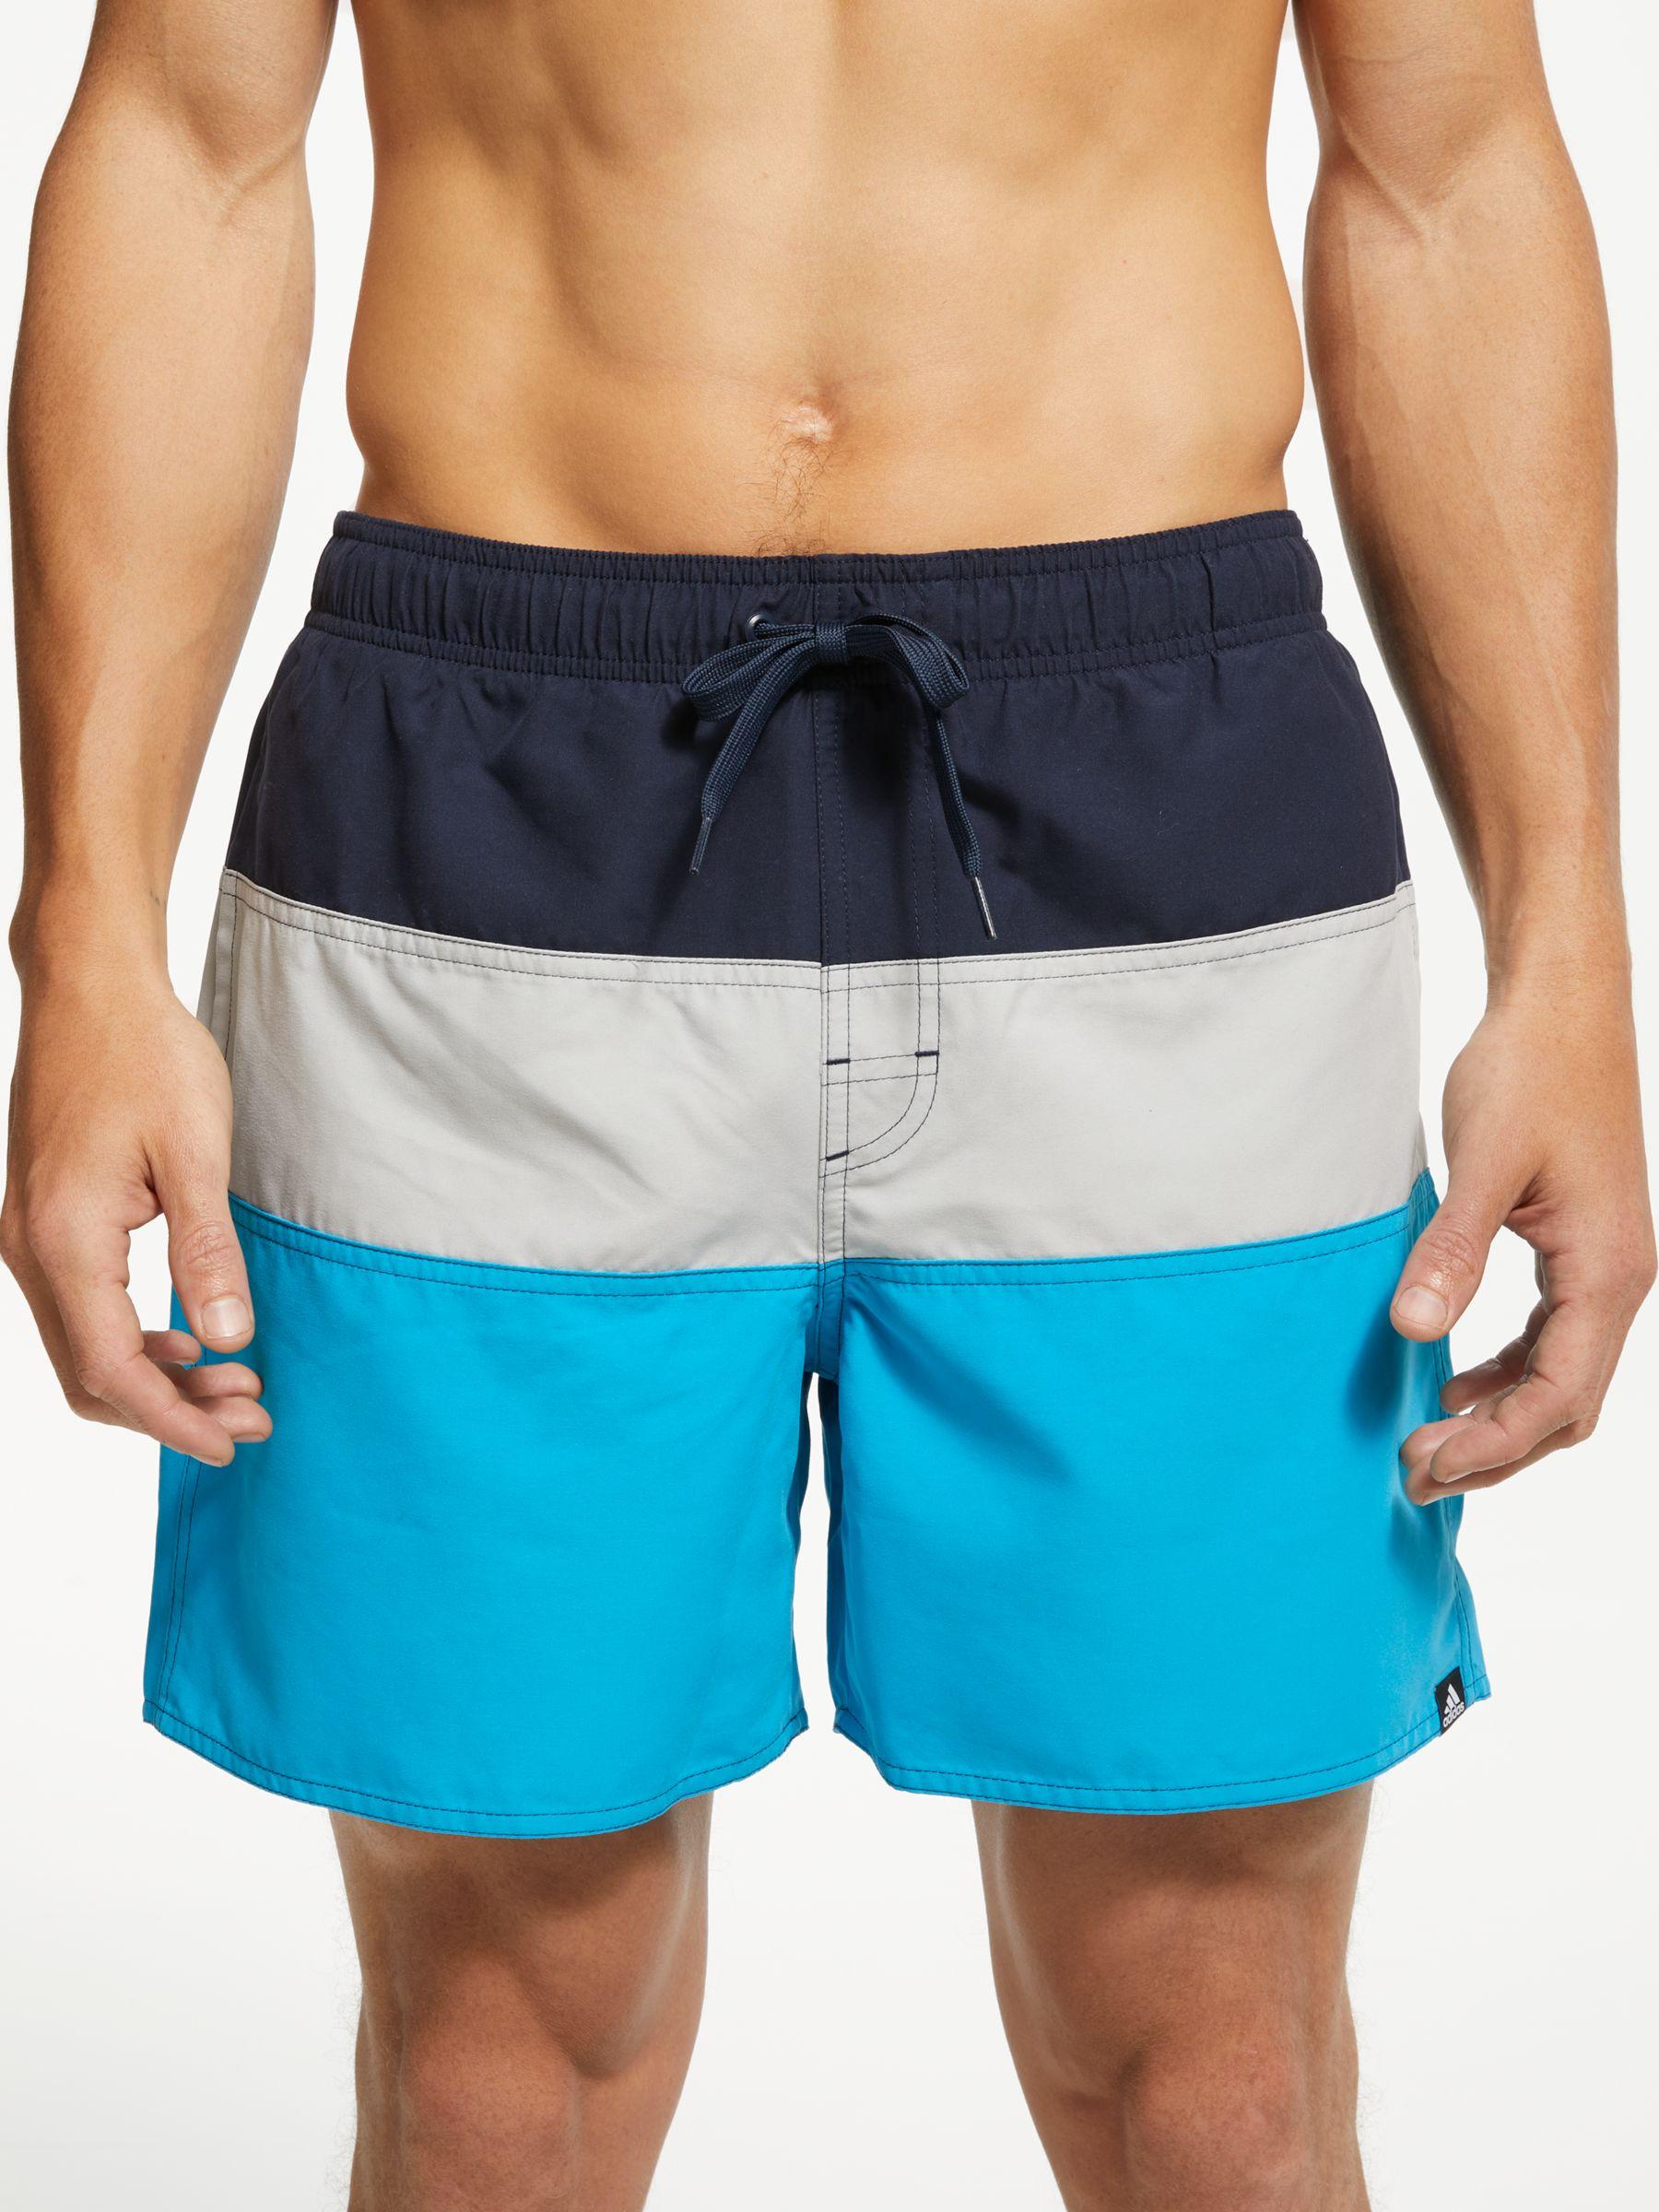 adidas Synthetic Colour Block Swim Shorts in Blue for Men - Lyst